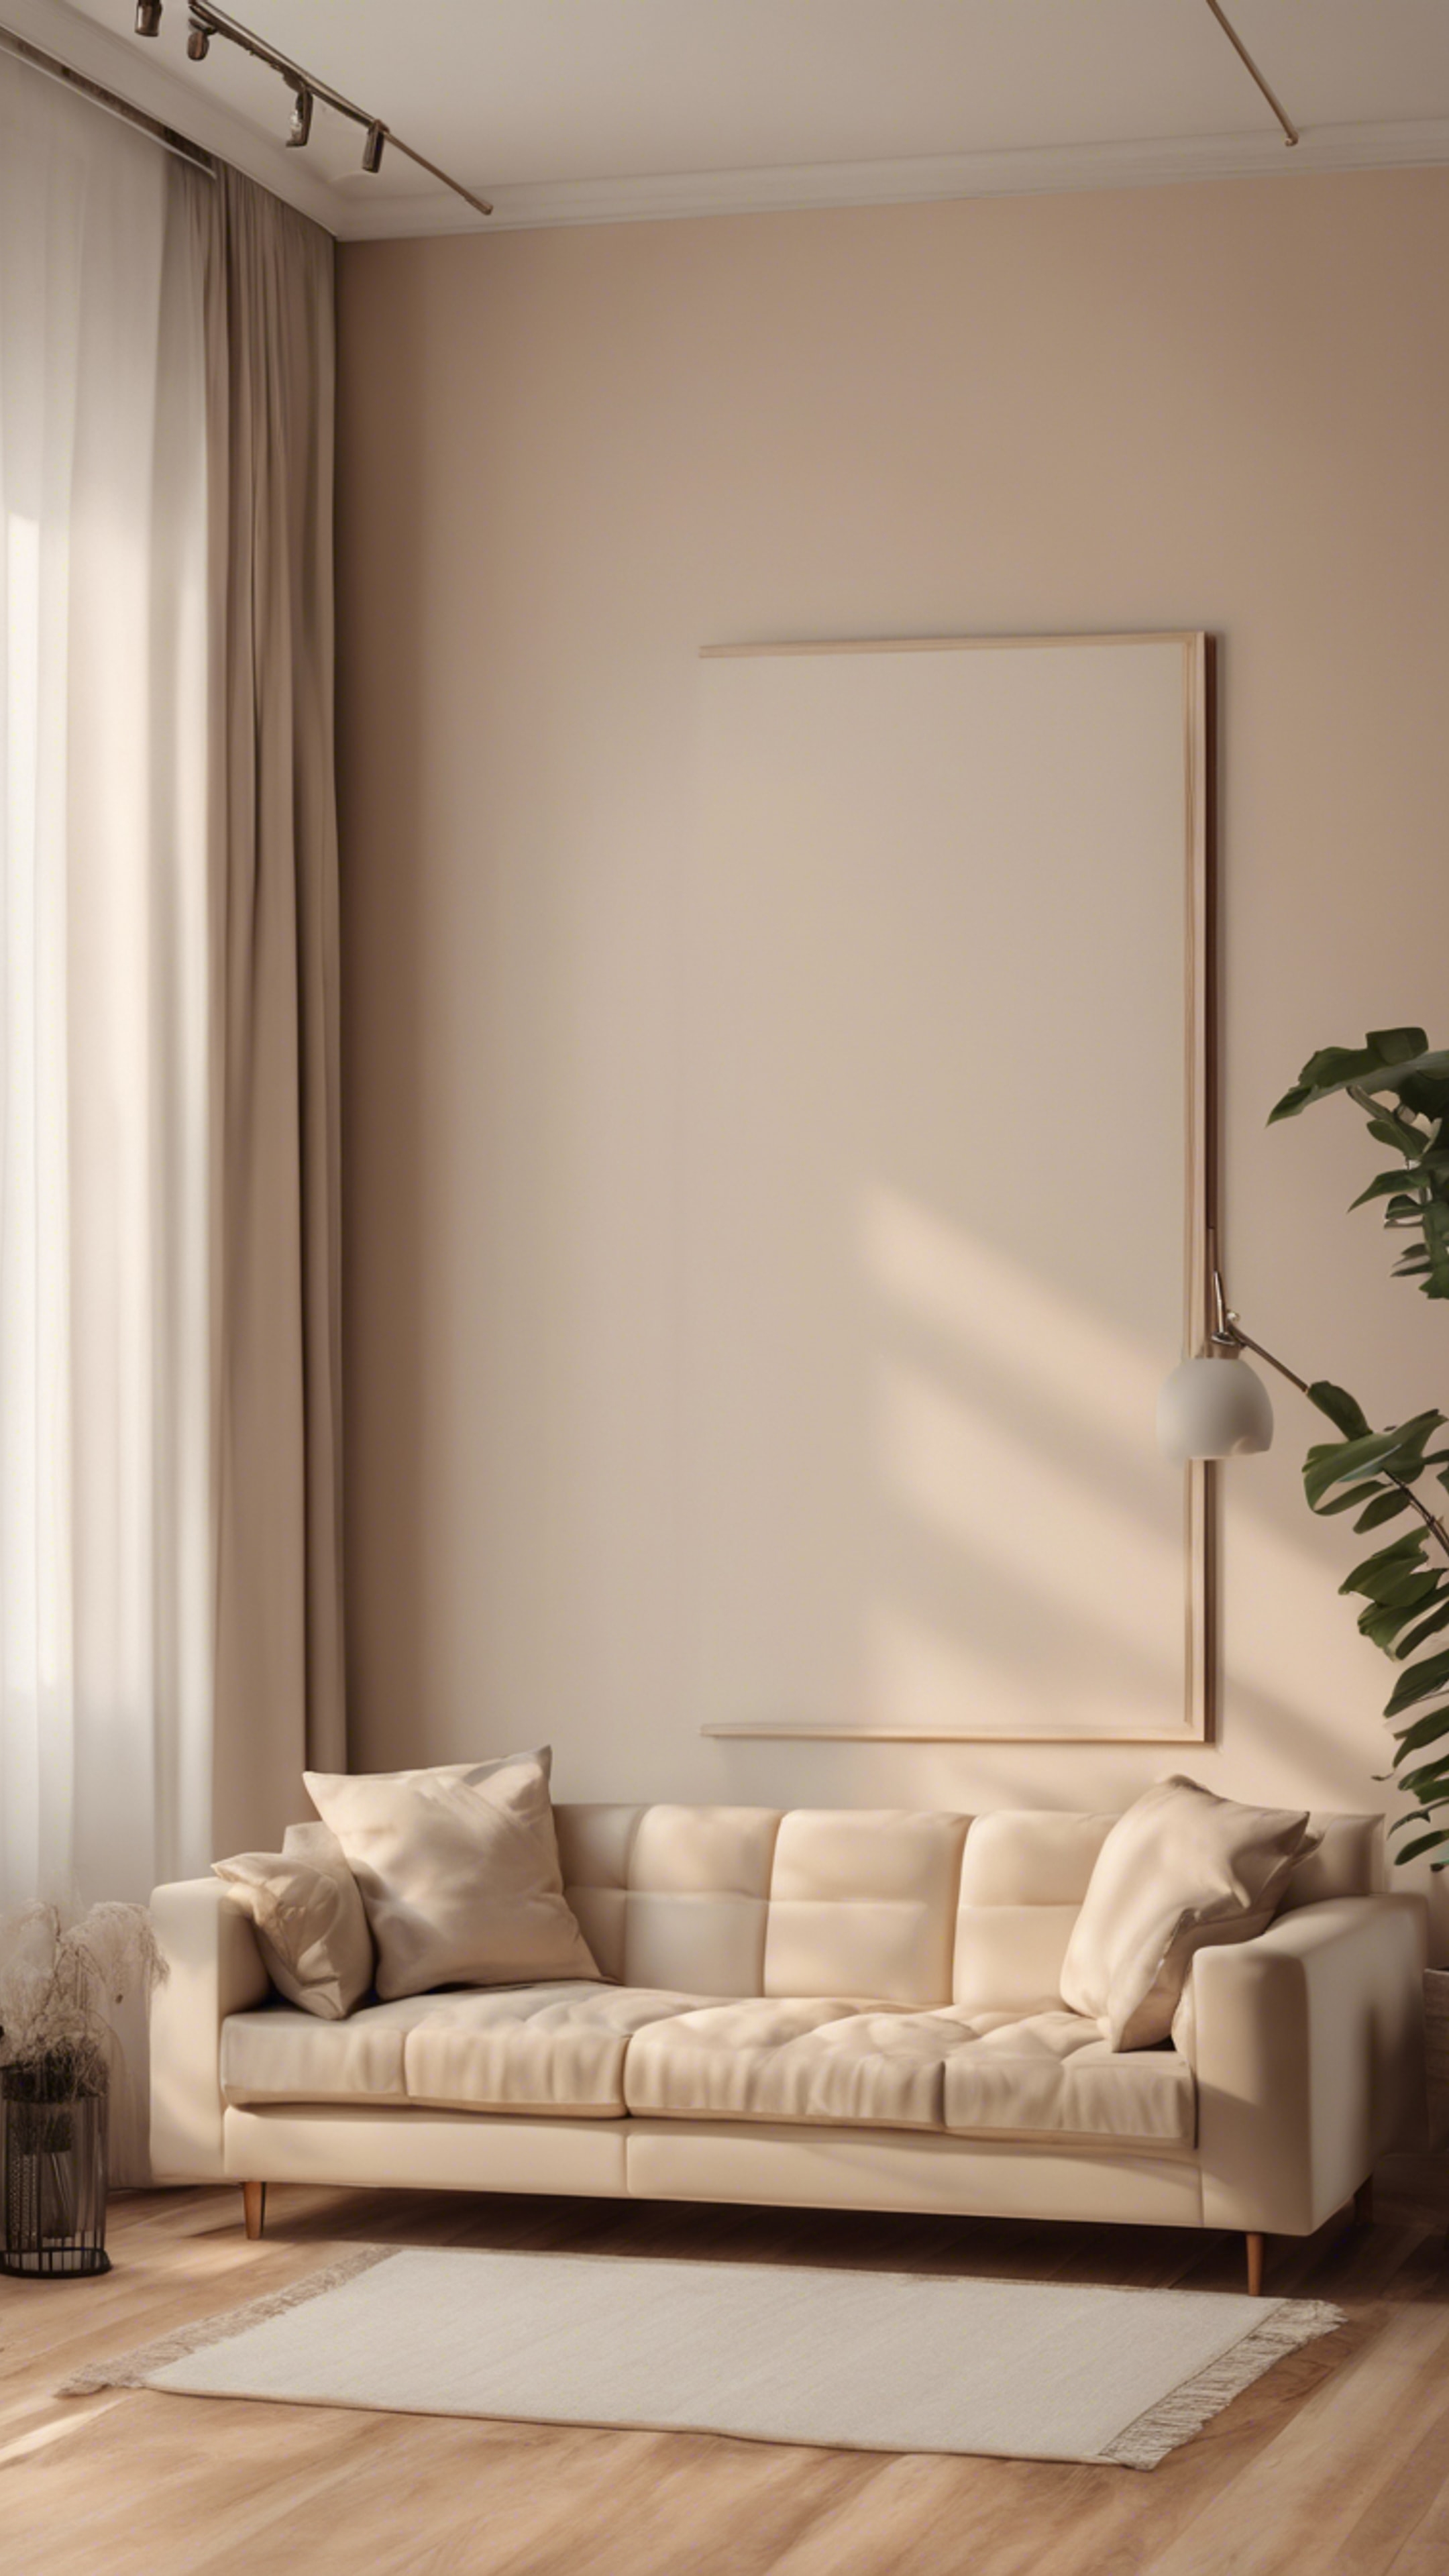 A minimalist room with beige walls, wooden floor, and comfortable beige-colored sofa. Ფონი[282520d07896429087dc]